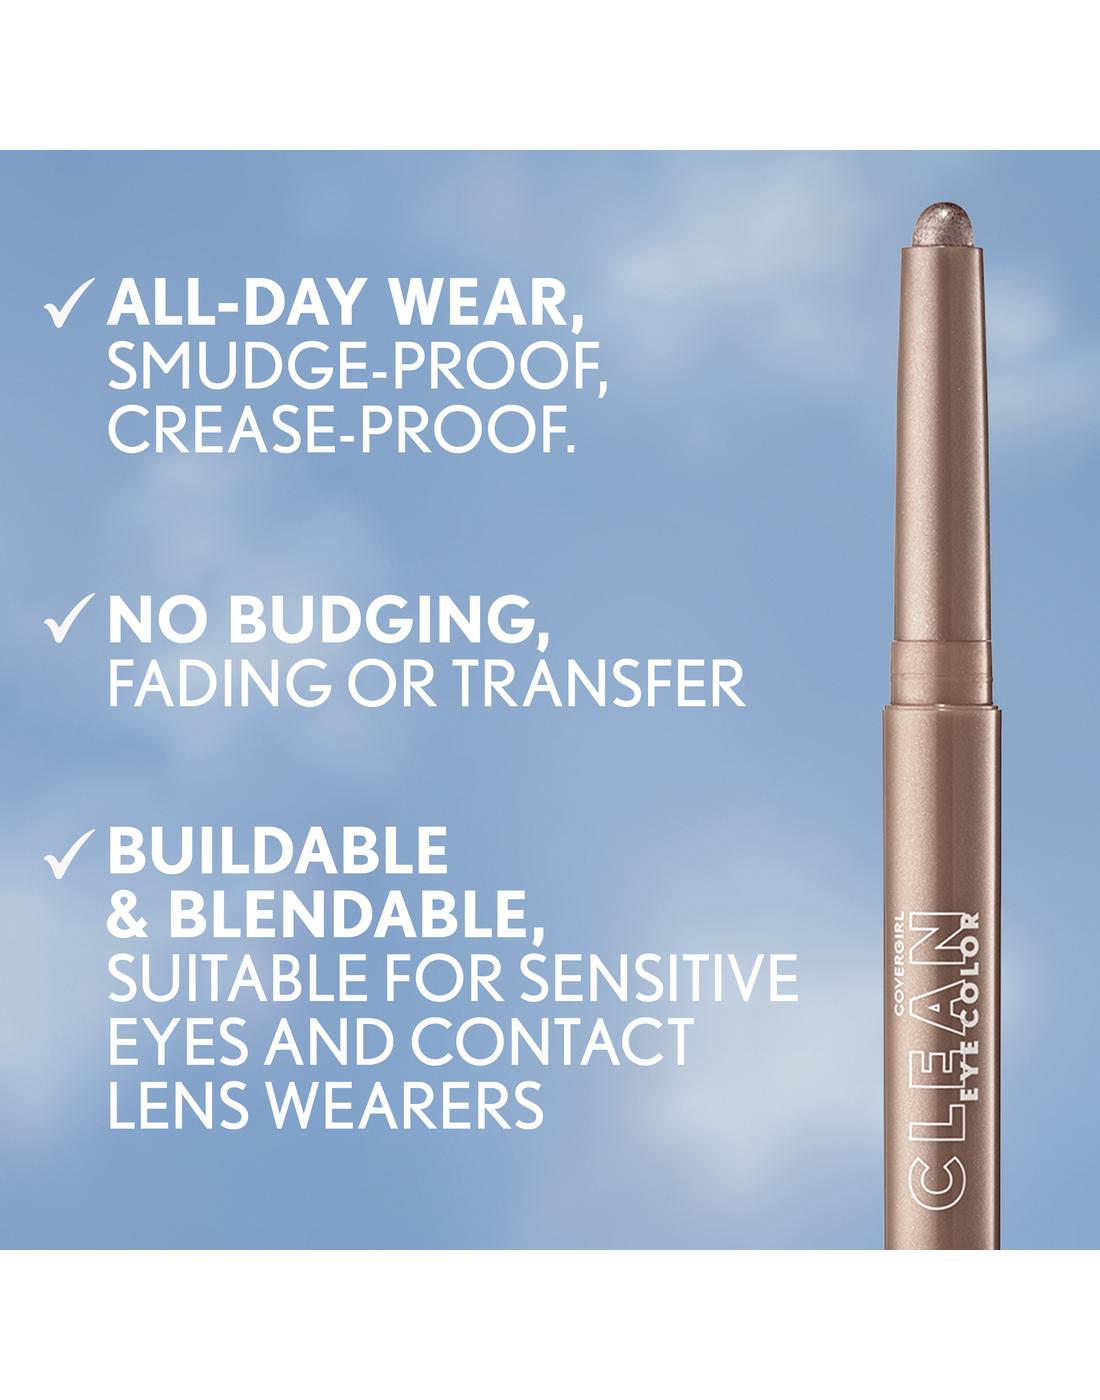 Covergirl Clean Eye Color - Sunrise Beam; image 2 of 3